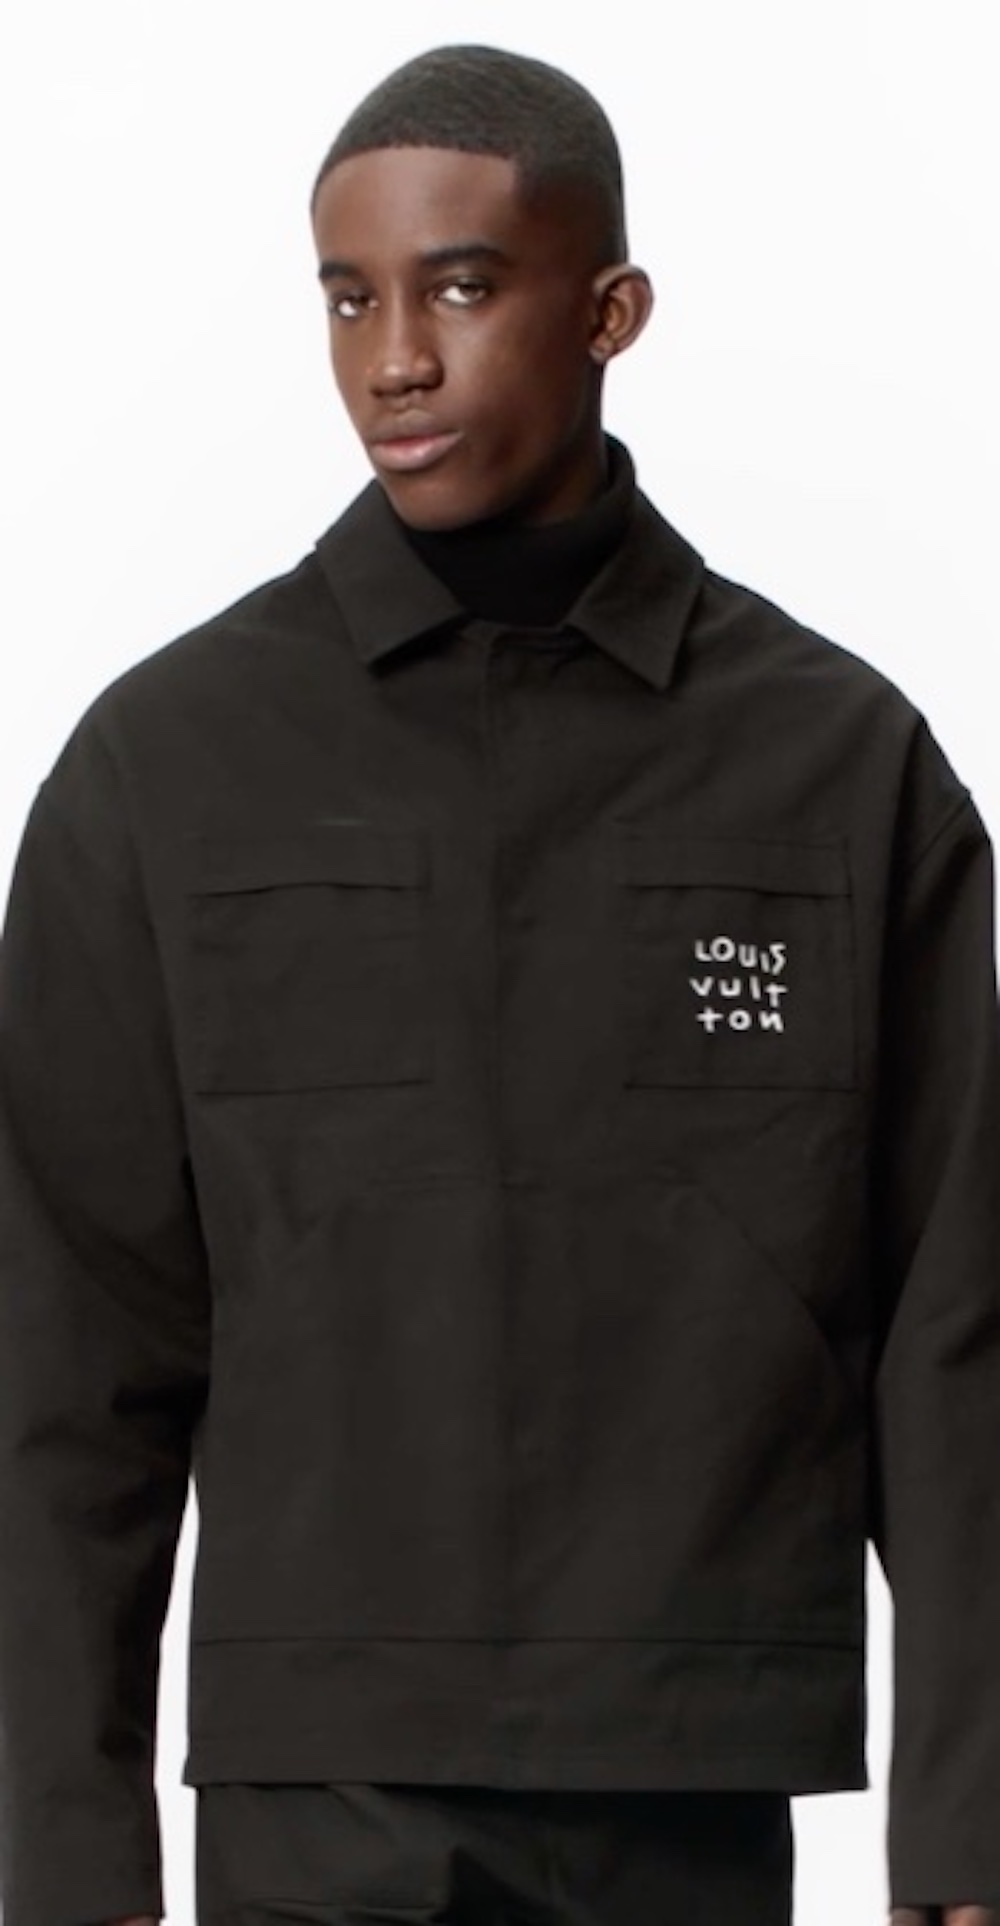 Louis Vuitton 2022 LV Spread Technical Overshirt Jacket w/ Tags - Black  Outerwear, Clothing - LOU597460